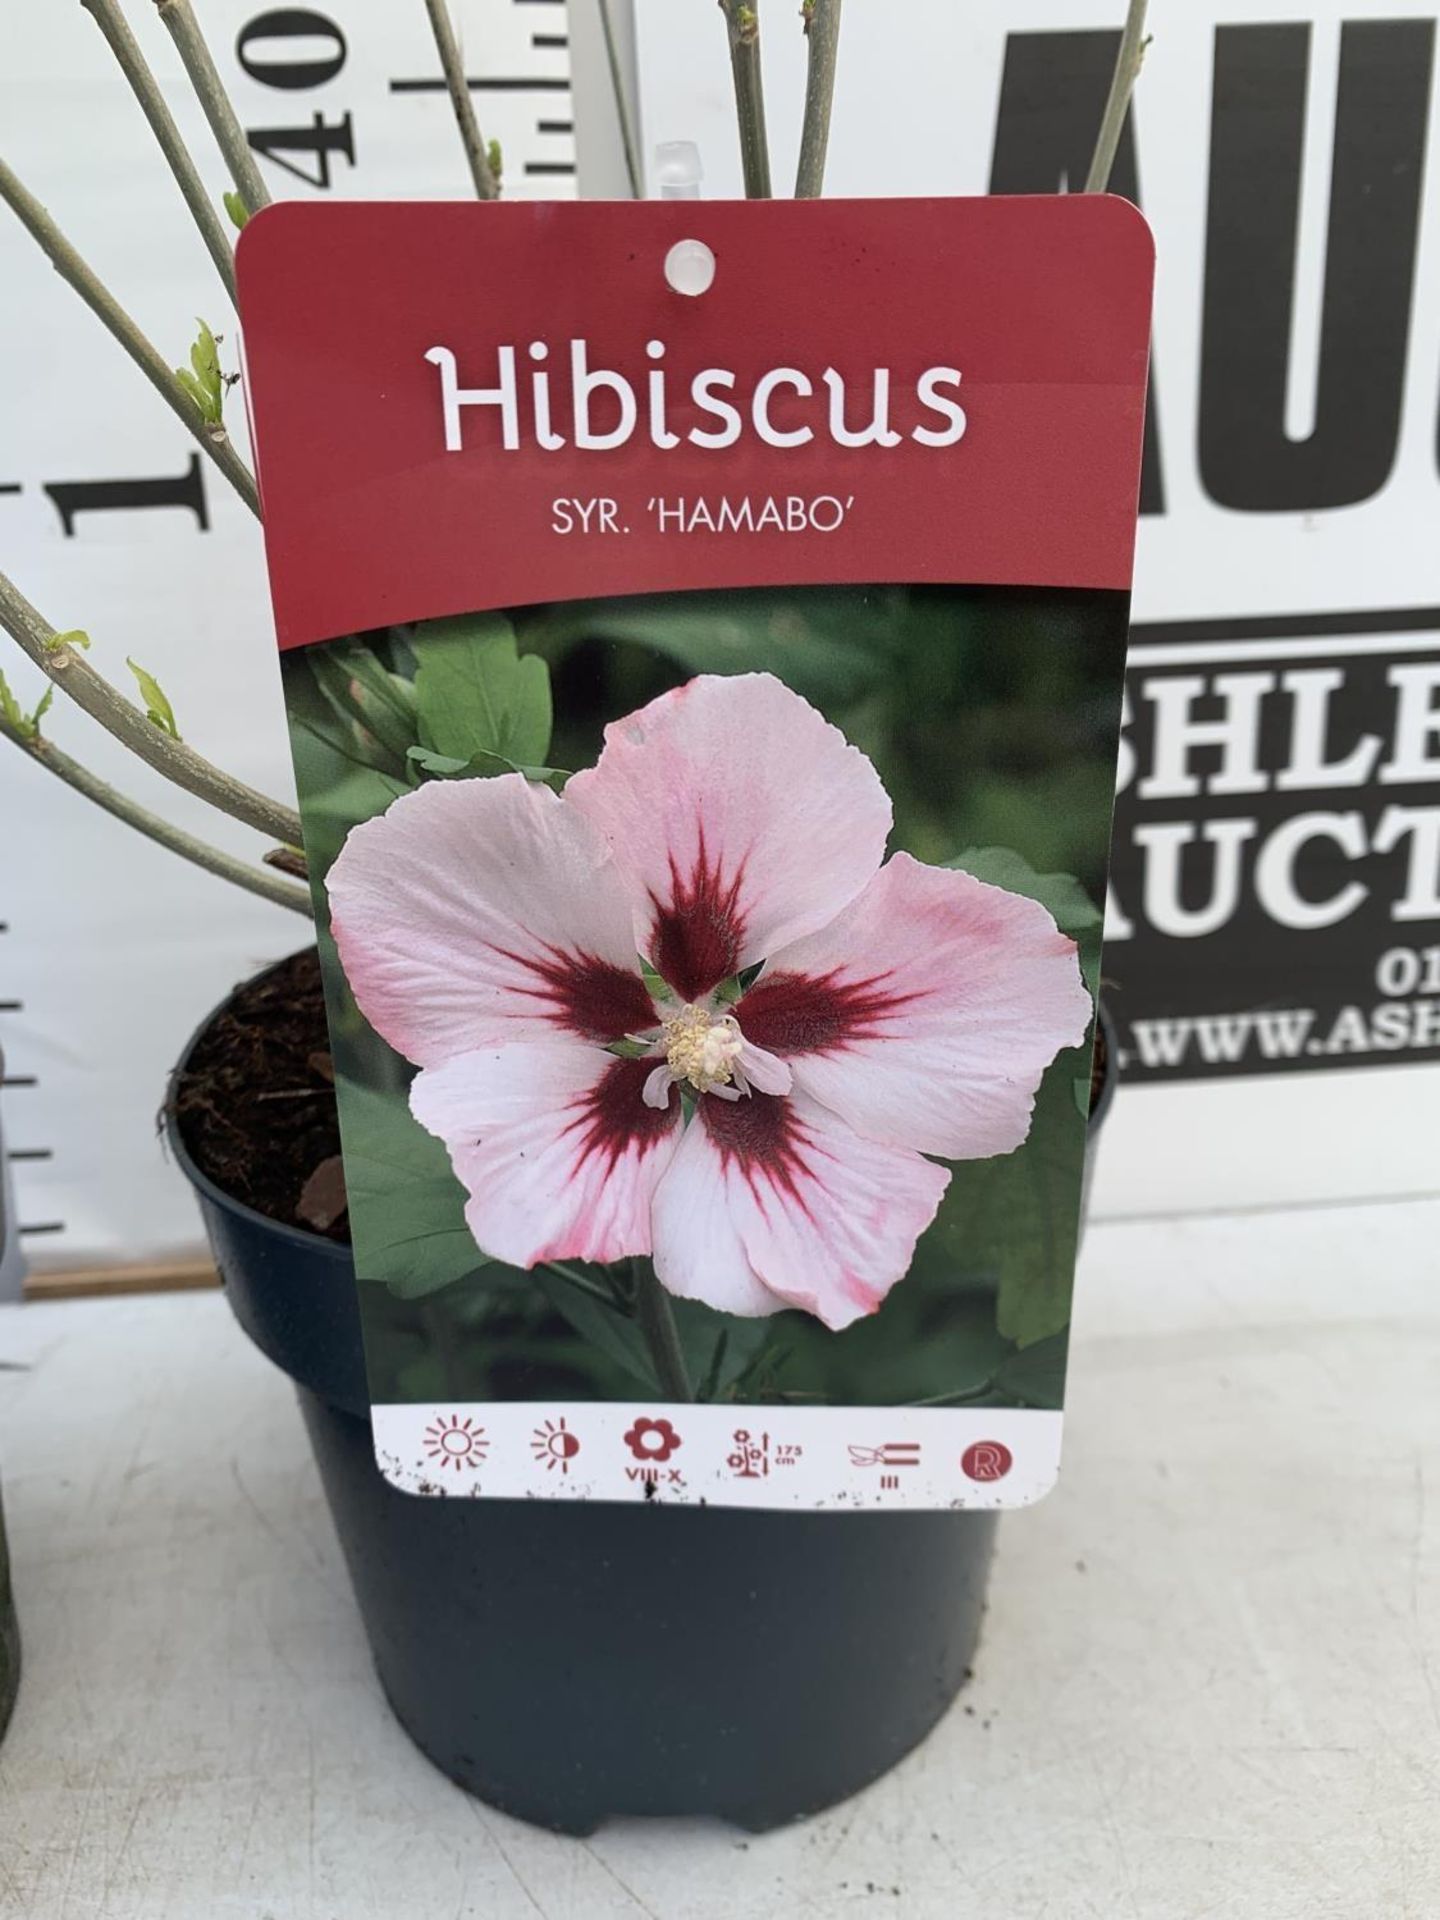 TWO HIBISCUS SYRIACUS DUC DE BRABANT AND HAMABO IN 3 LTR POTS 60CM TALL PLUS VAT TO BE SOLD FOR - Image 5 of 8